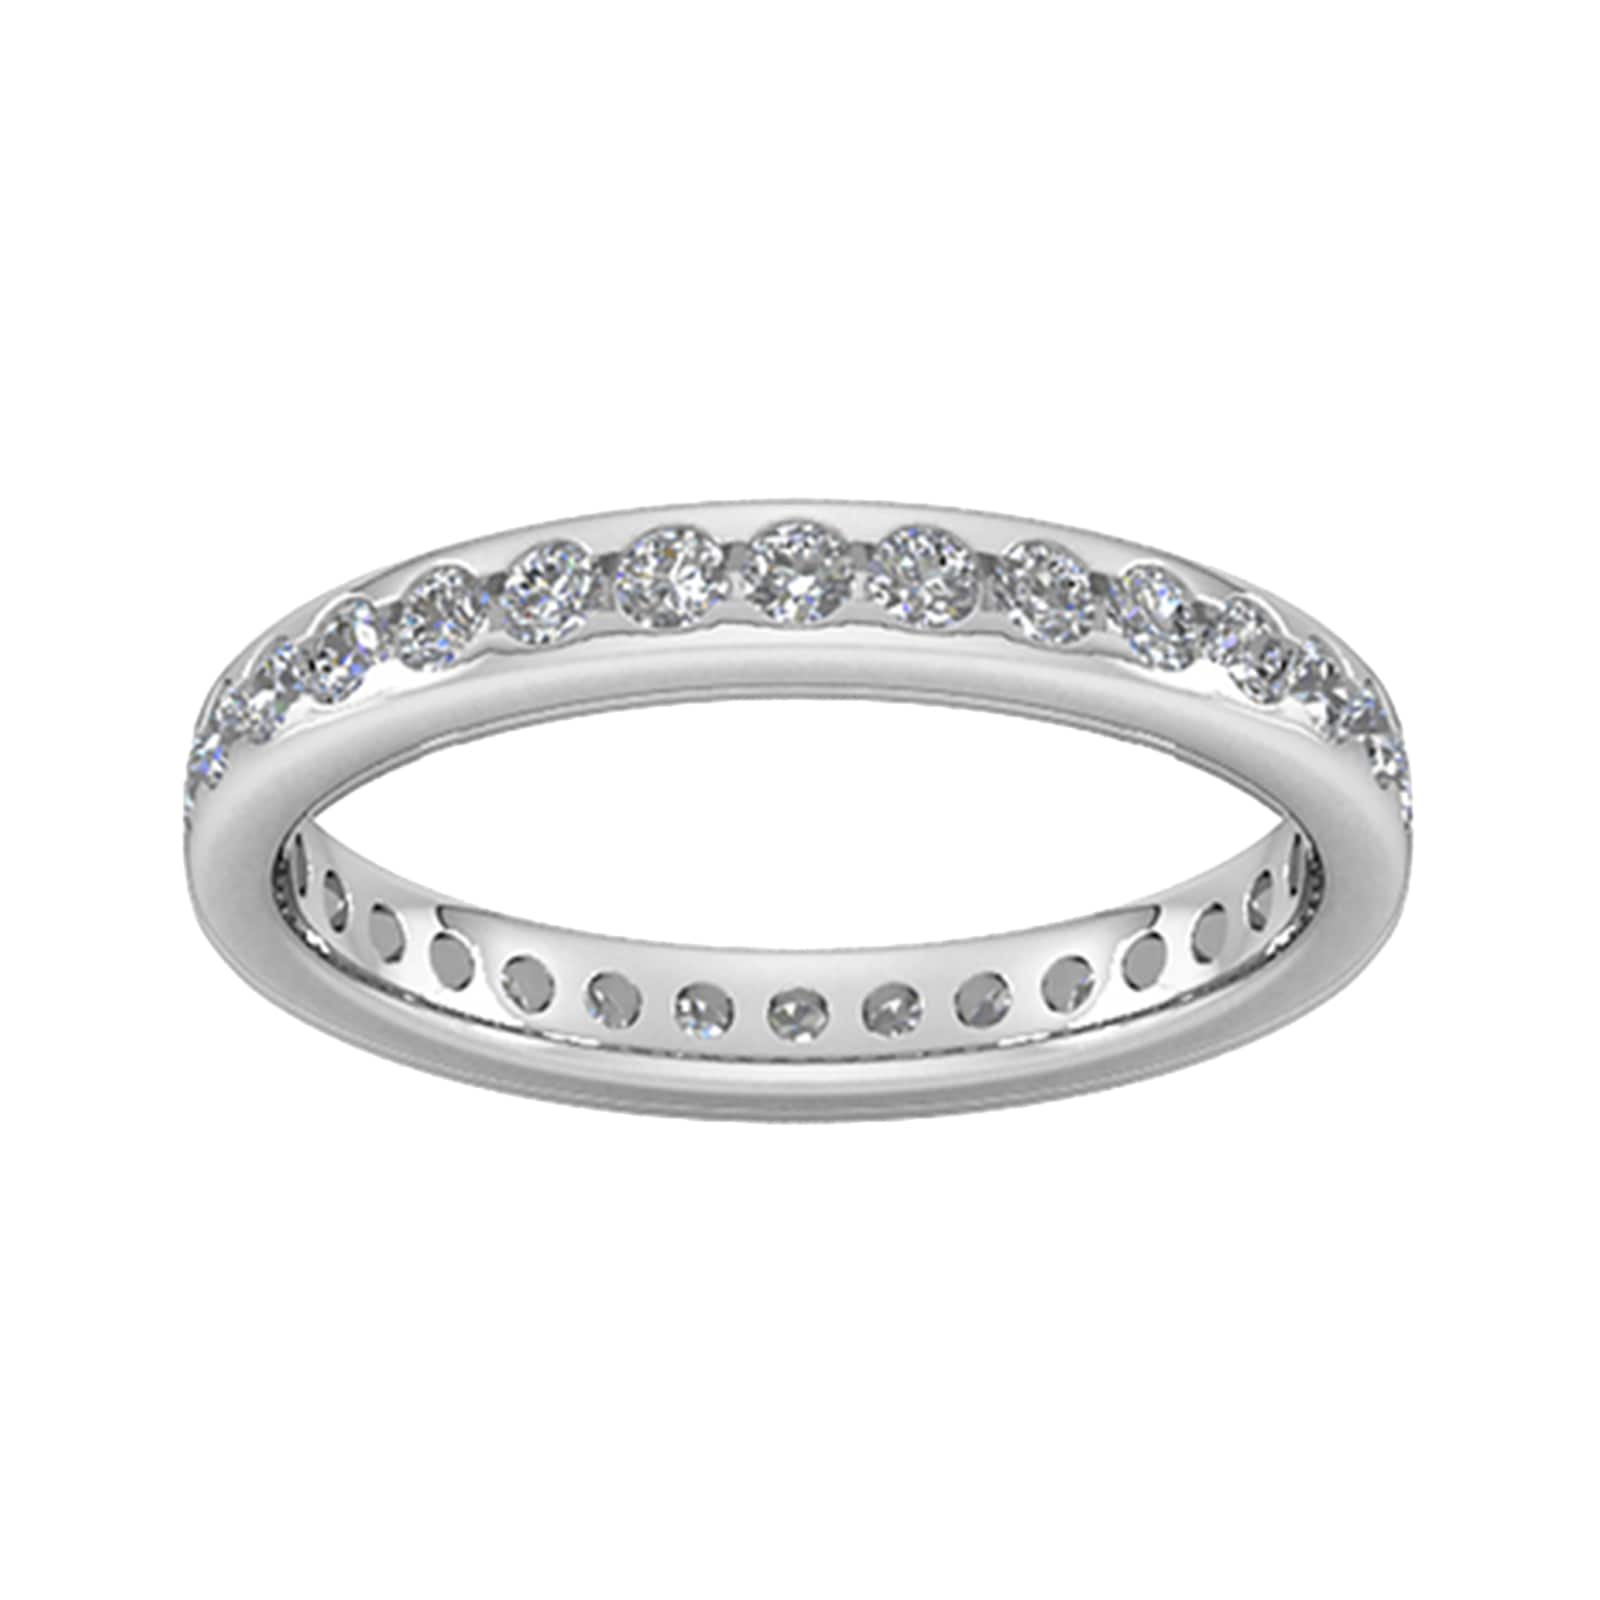 0.81 Carat Total Weight Brilliant Cut Scalloped Channel Set Diamond Wedding Ring In 18 Carat White Gold - Ring Size Q